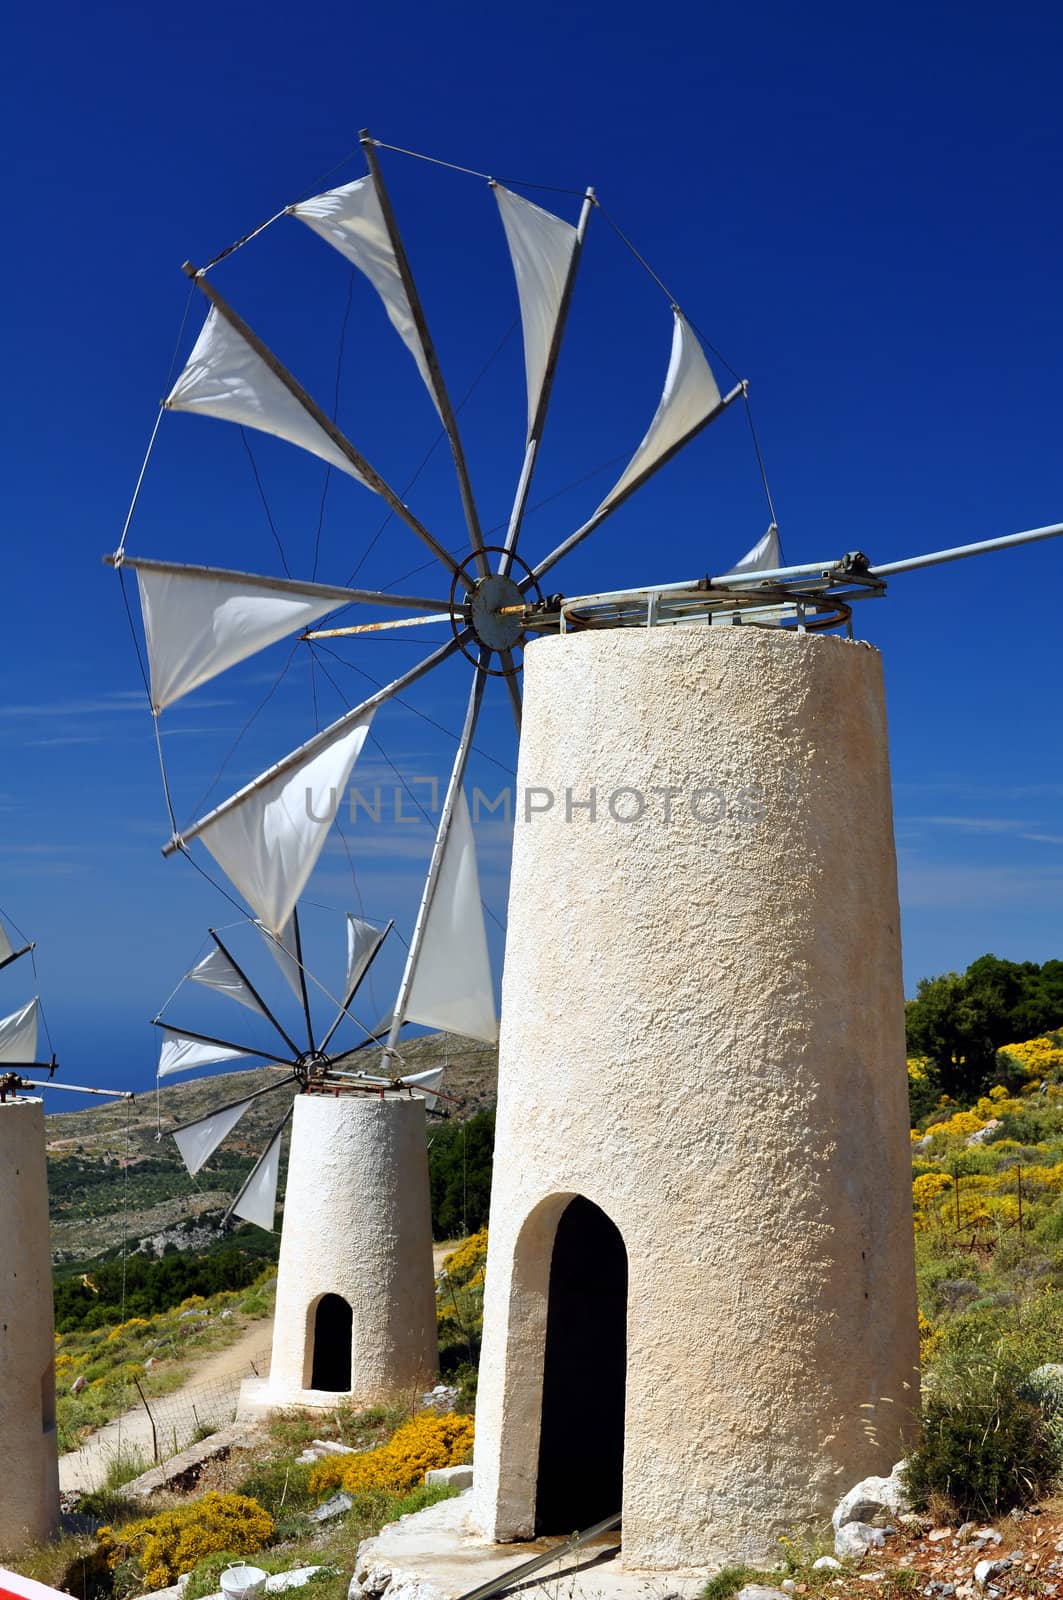 Travel photography: traditional wind mills in the Lassithi plateau, Crete.